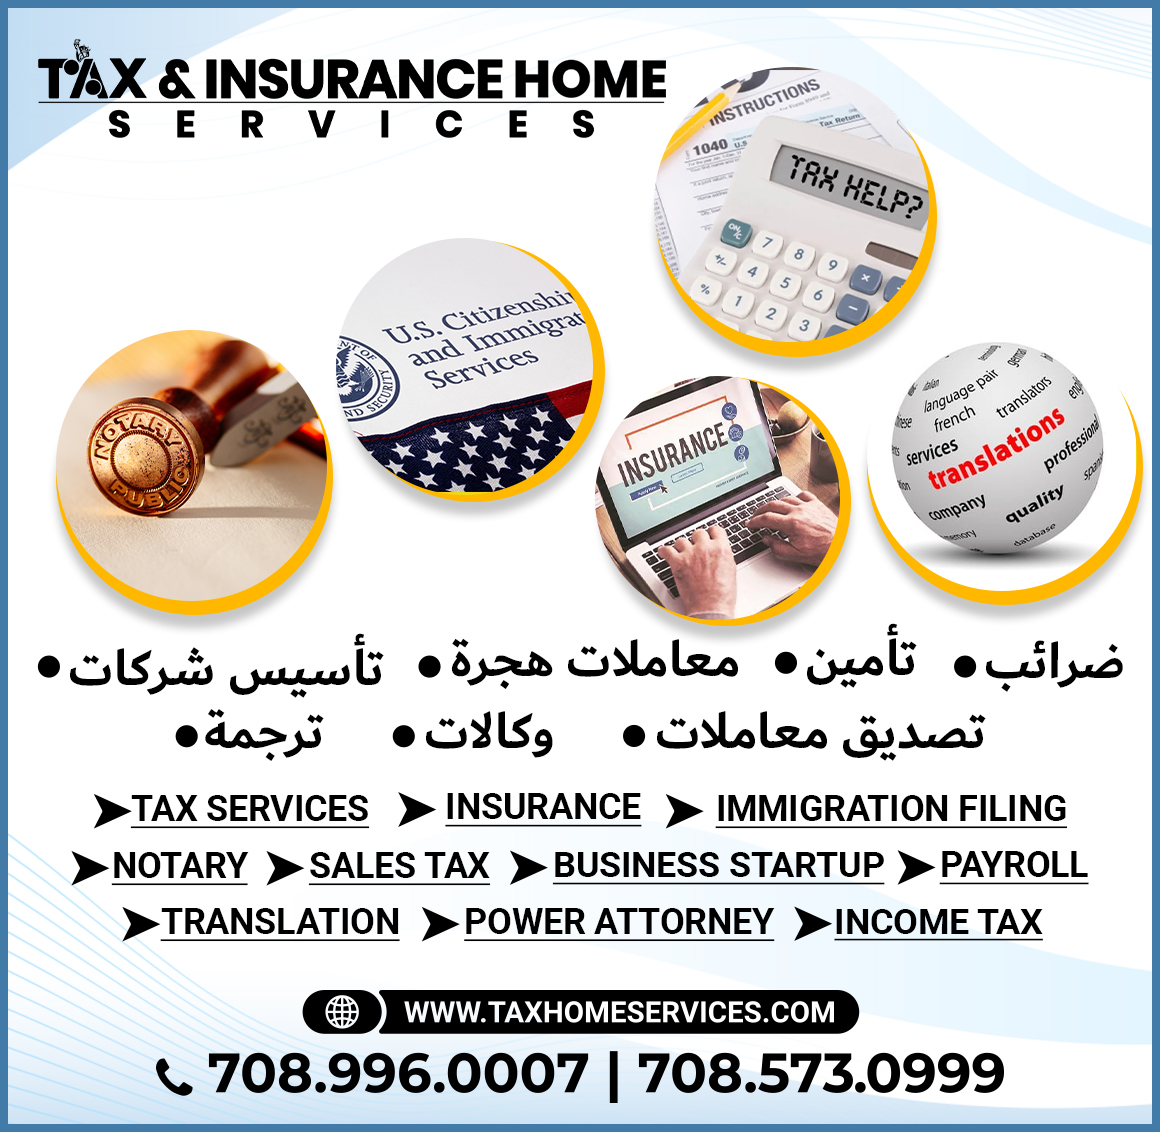 Tax & Insurance Home Services